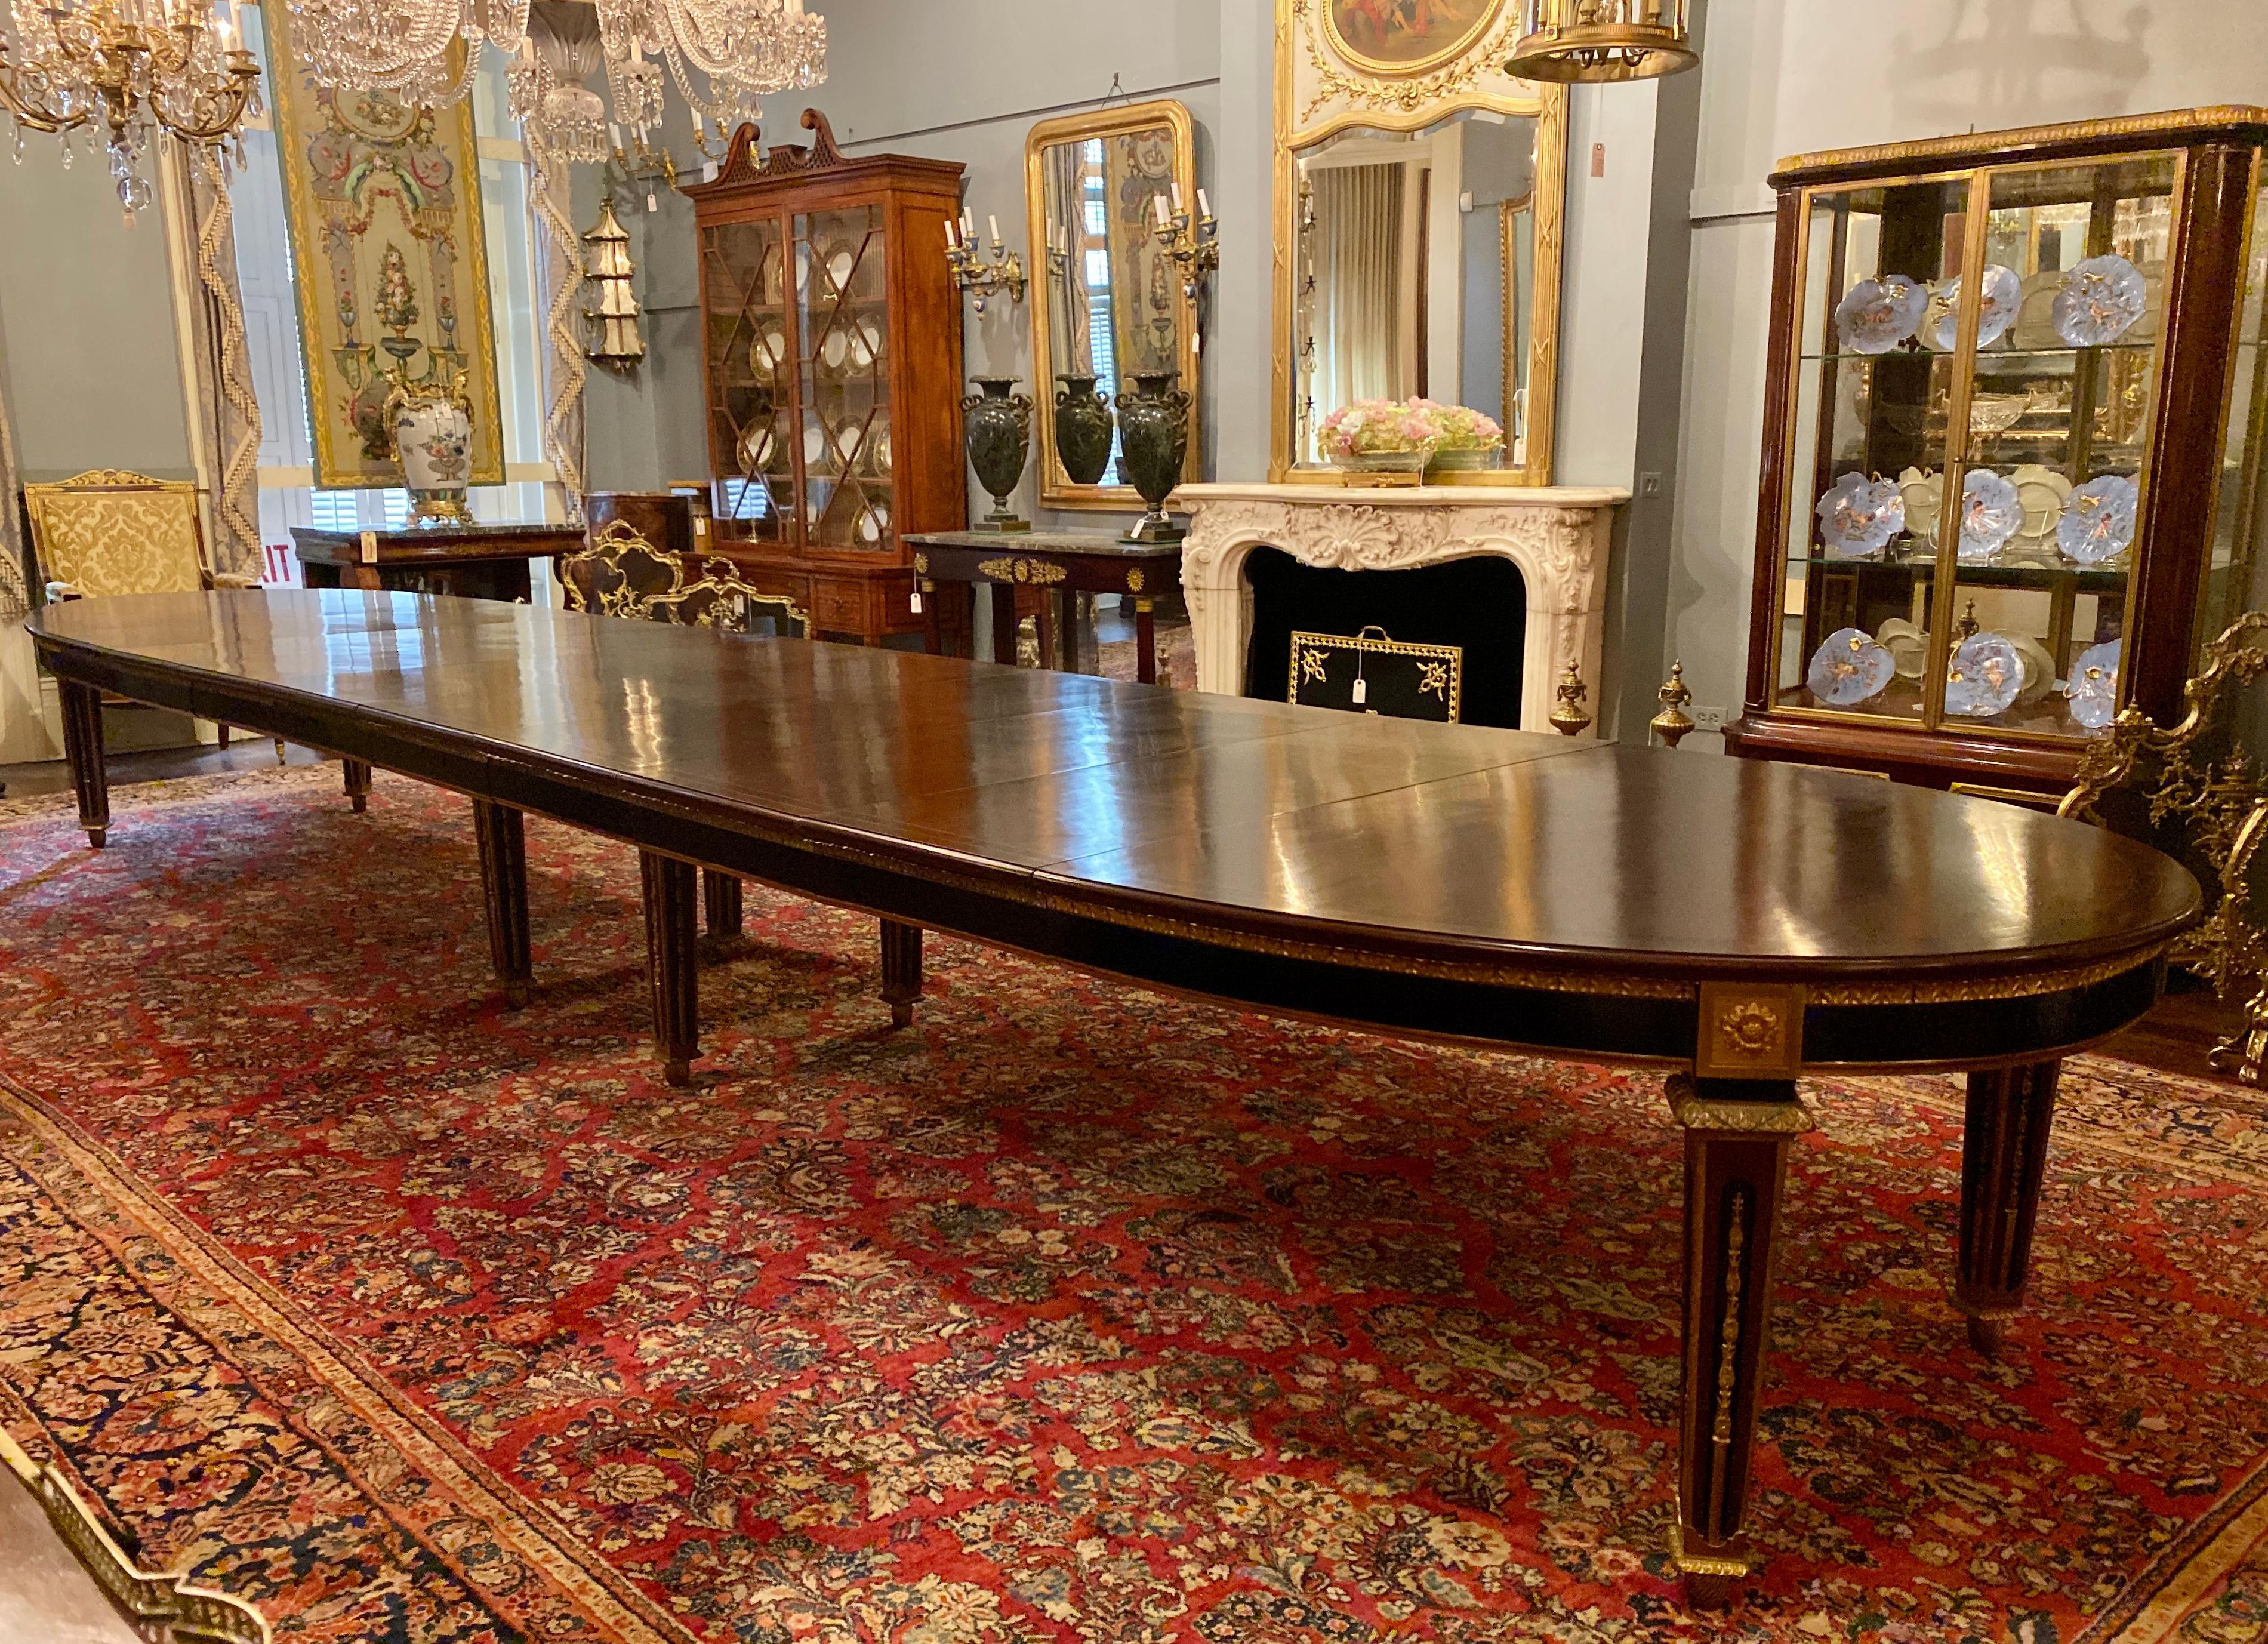 Exceptional size antique French Louis XVI ormolu-mounted mahogany dining table, circa 1860-1870.
19 1/2 feet (234 in) long when fully extended
8 leaves each 19